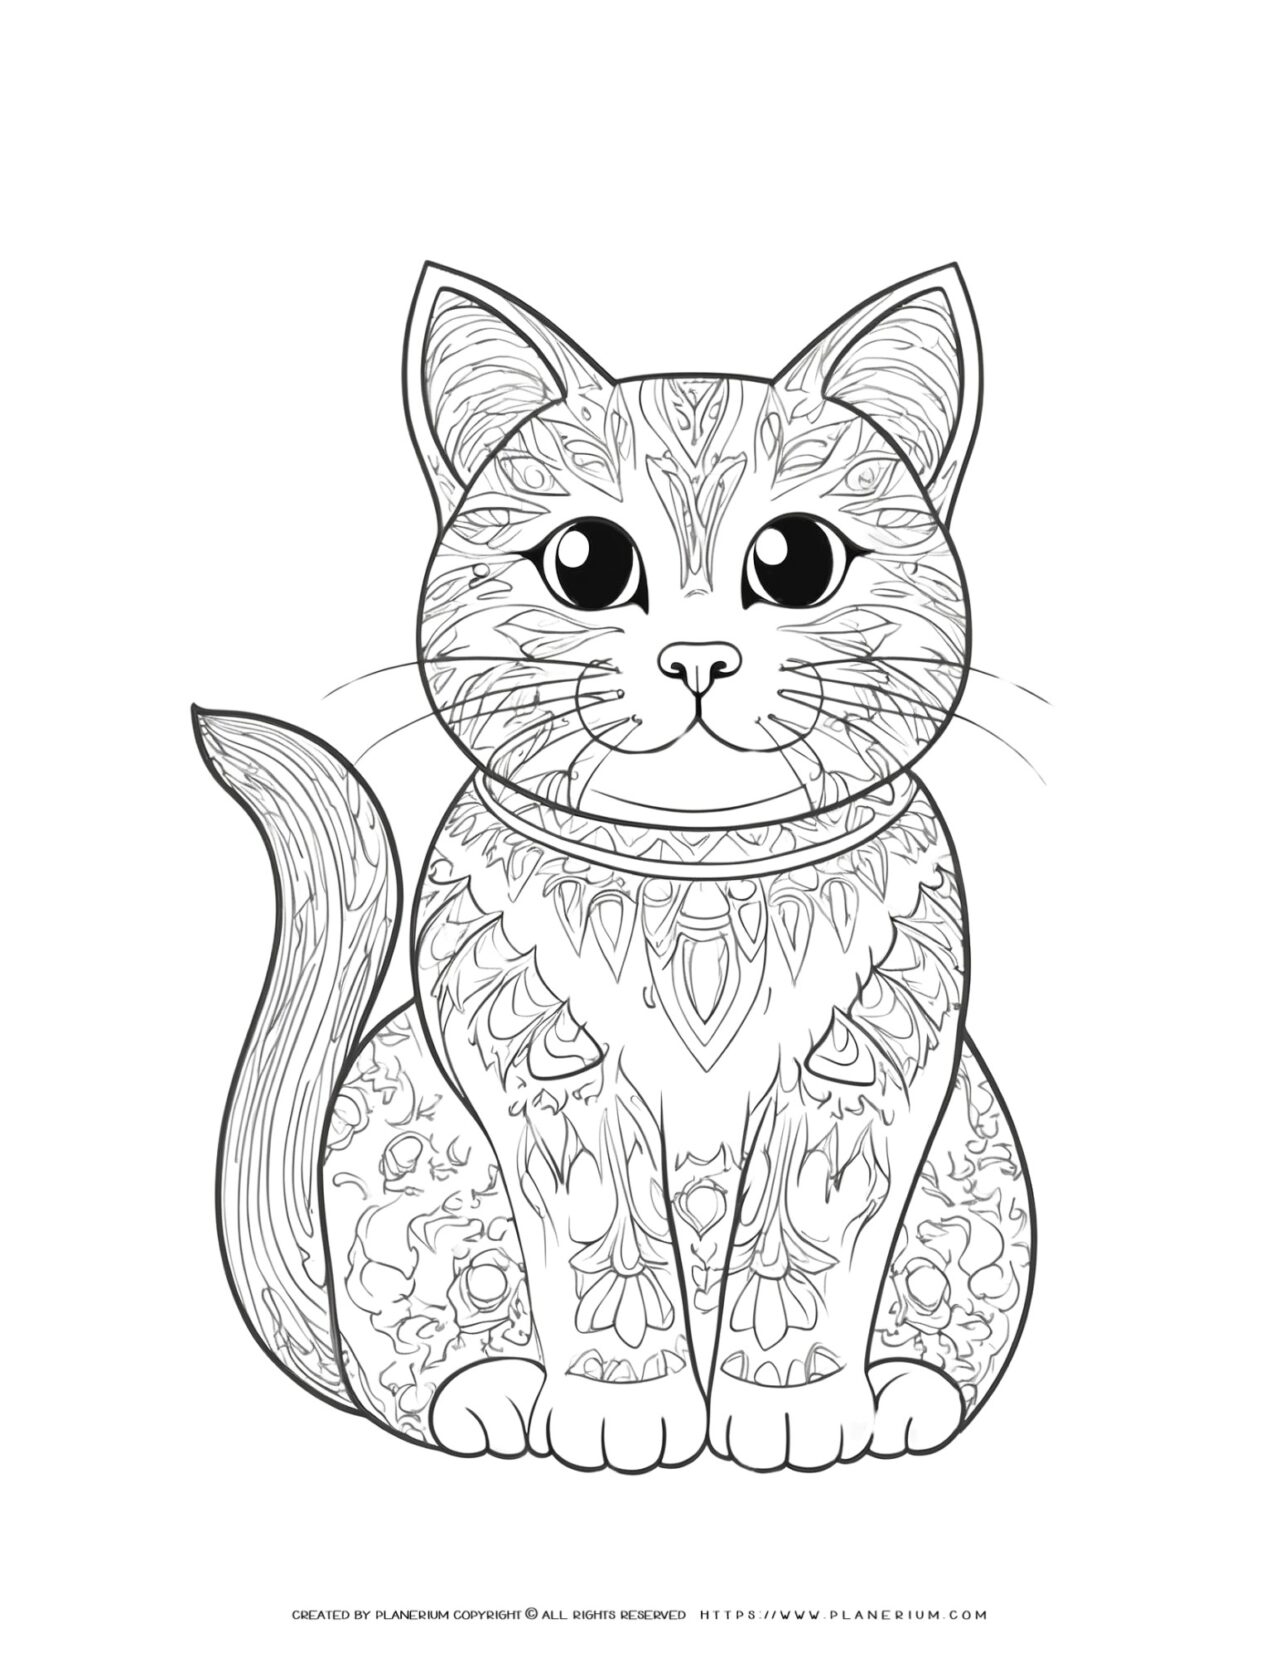 Decorated-Cat-Drawing-Coloring-Page-for-Adults